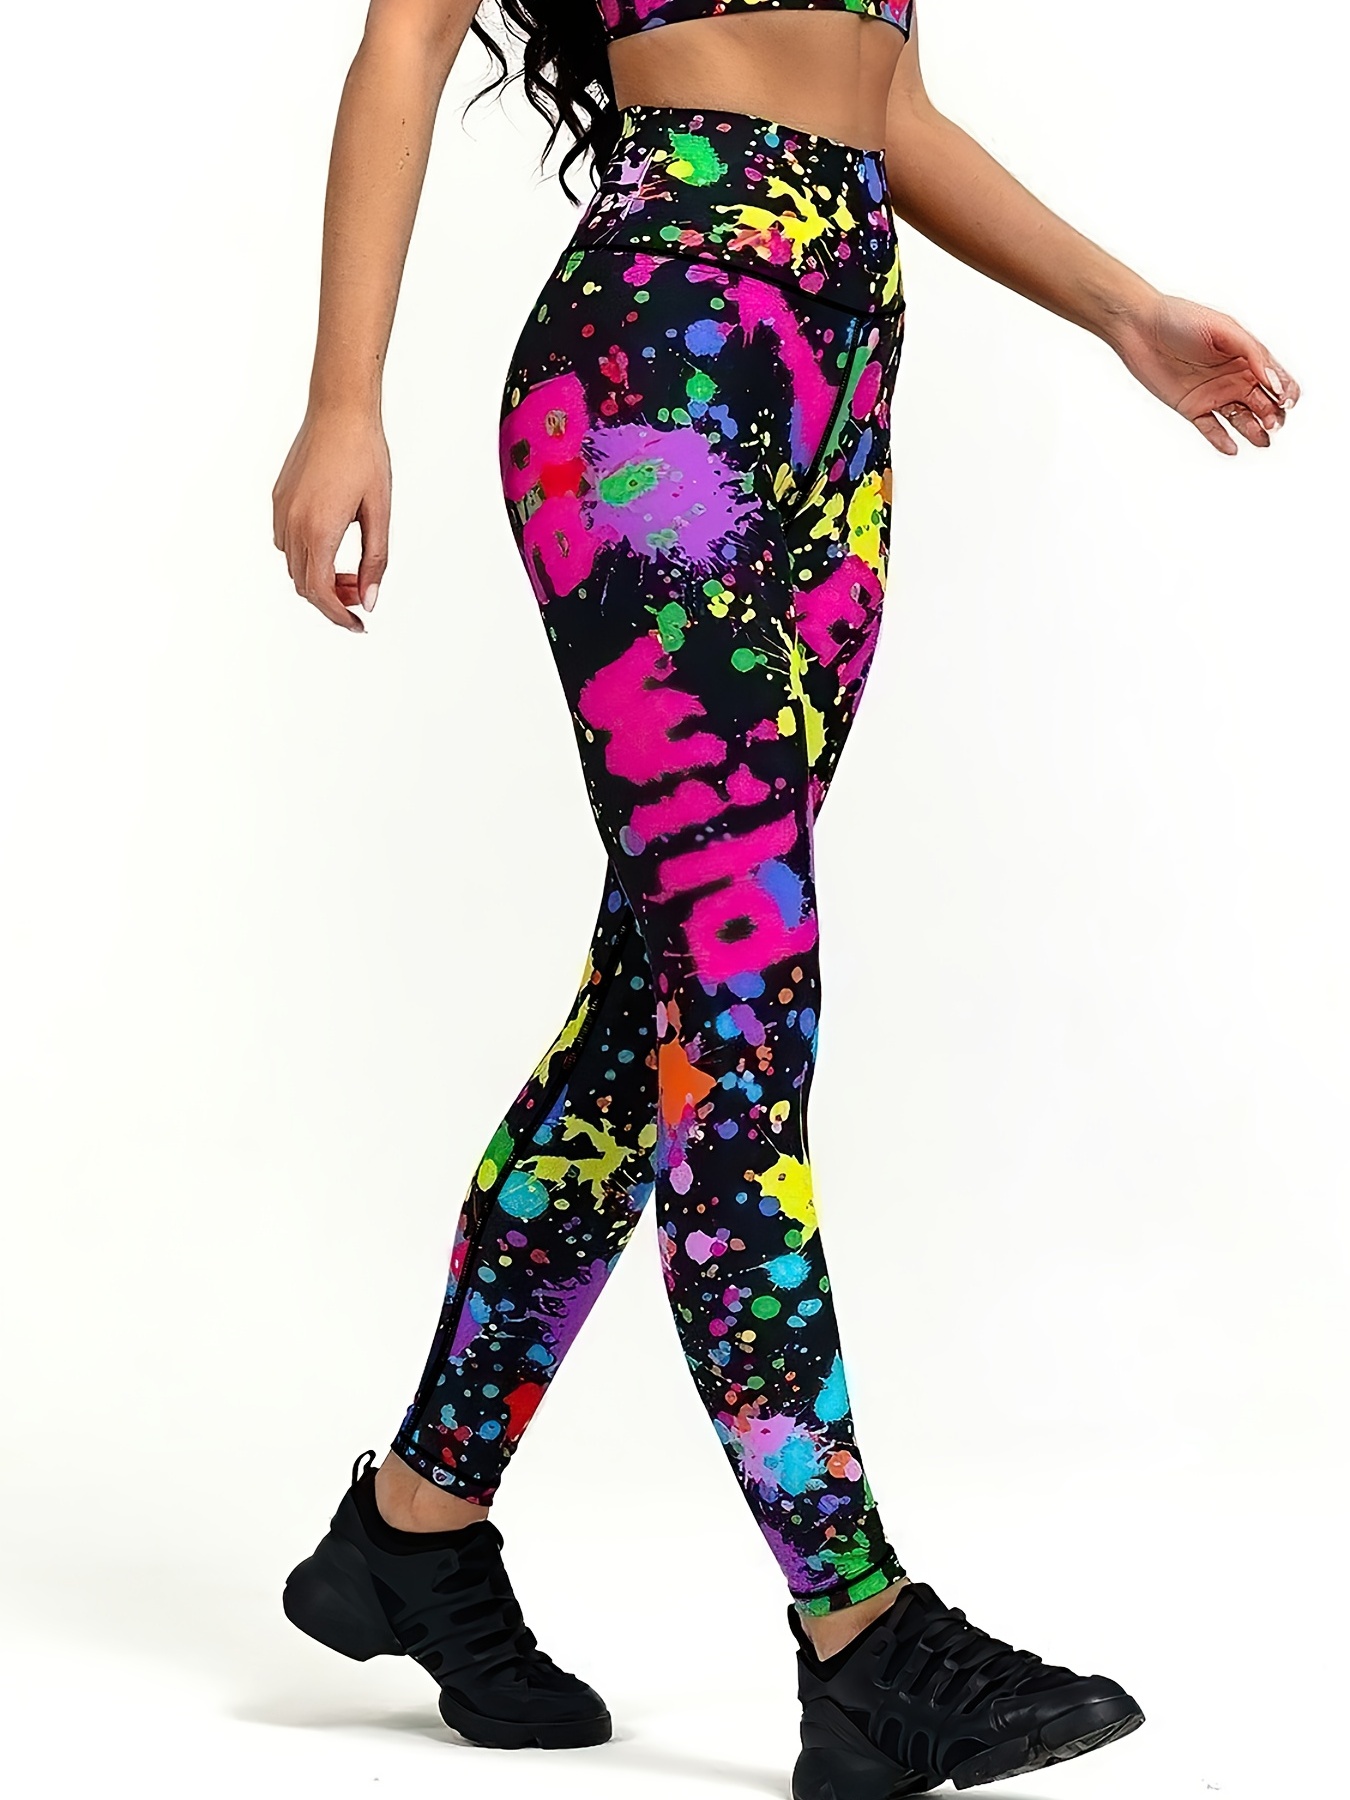 Women's Color Block High Waist Yoga Workout Running Butt Lift Tights Pants,  Fashion Printed Tummy Control Slimming Booty Leggings, Women's Activewear, Check Out Today's Deals Now